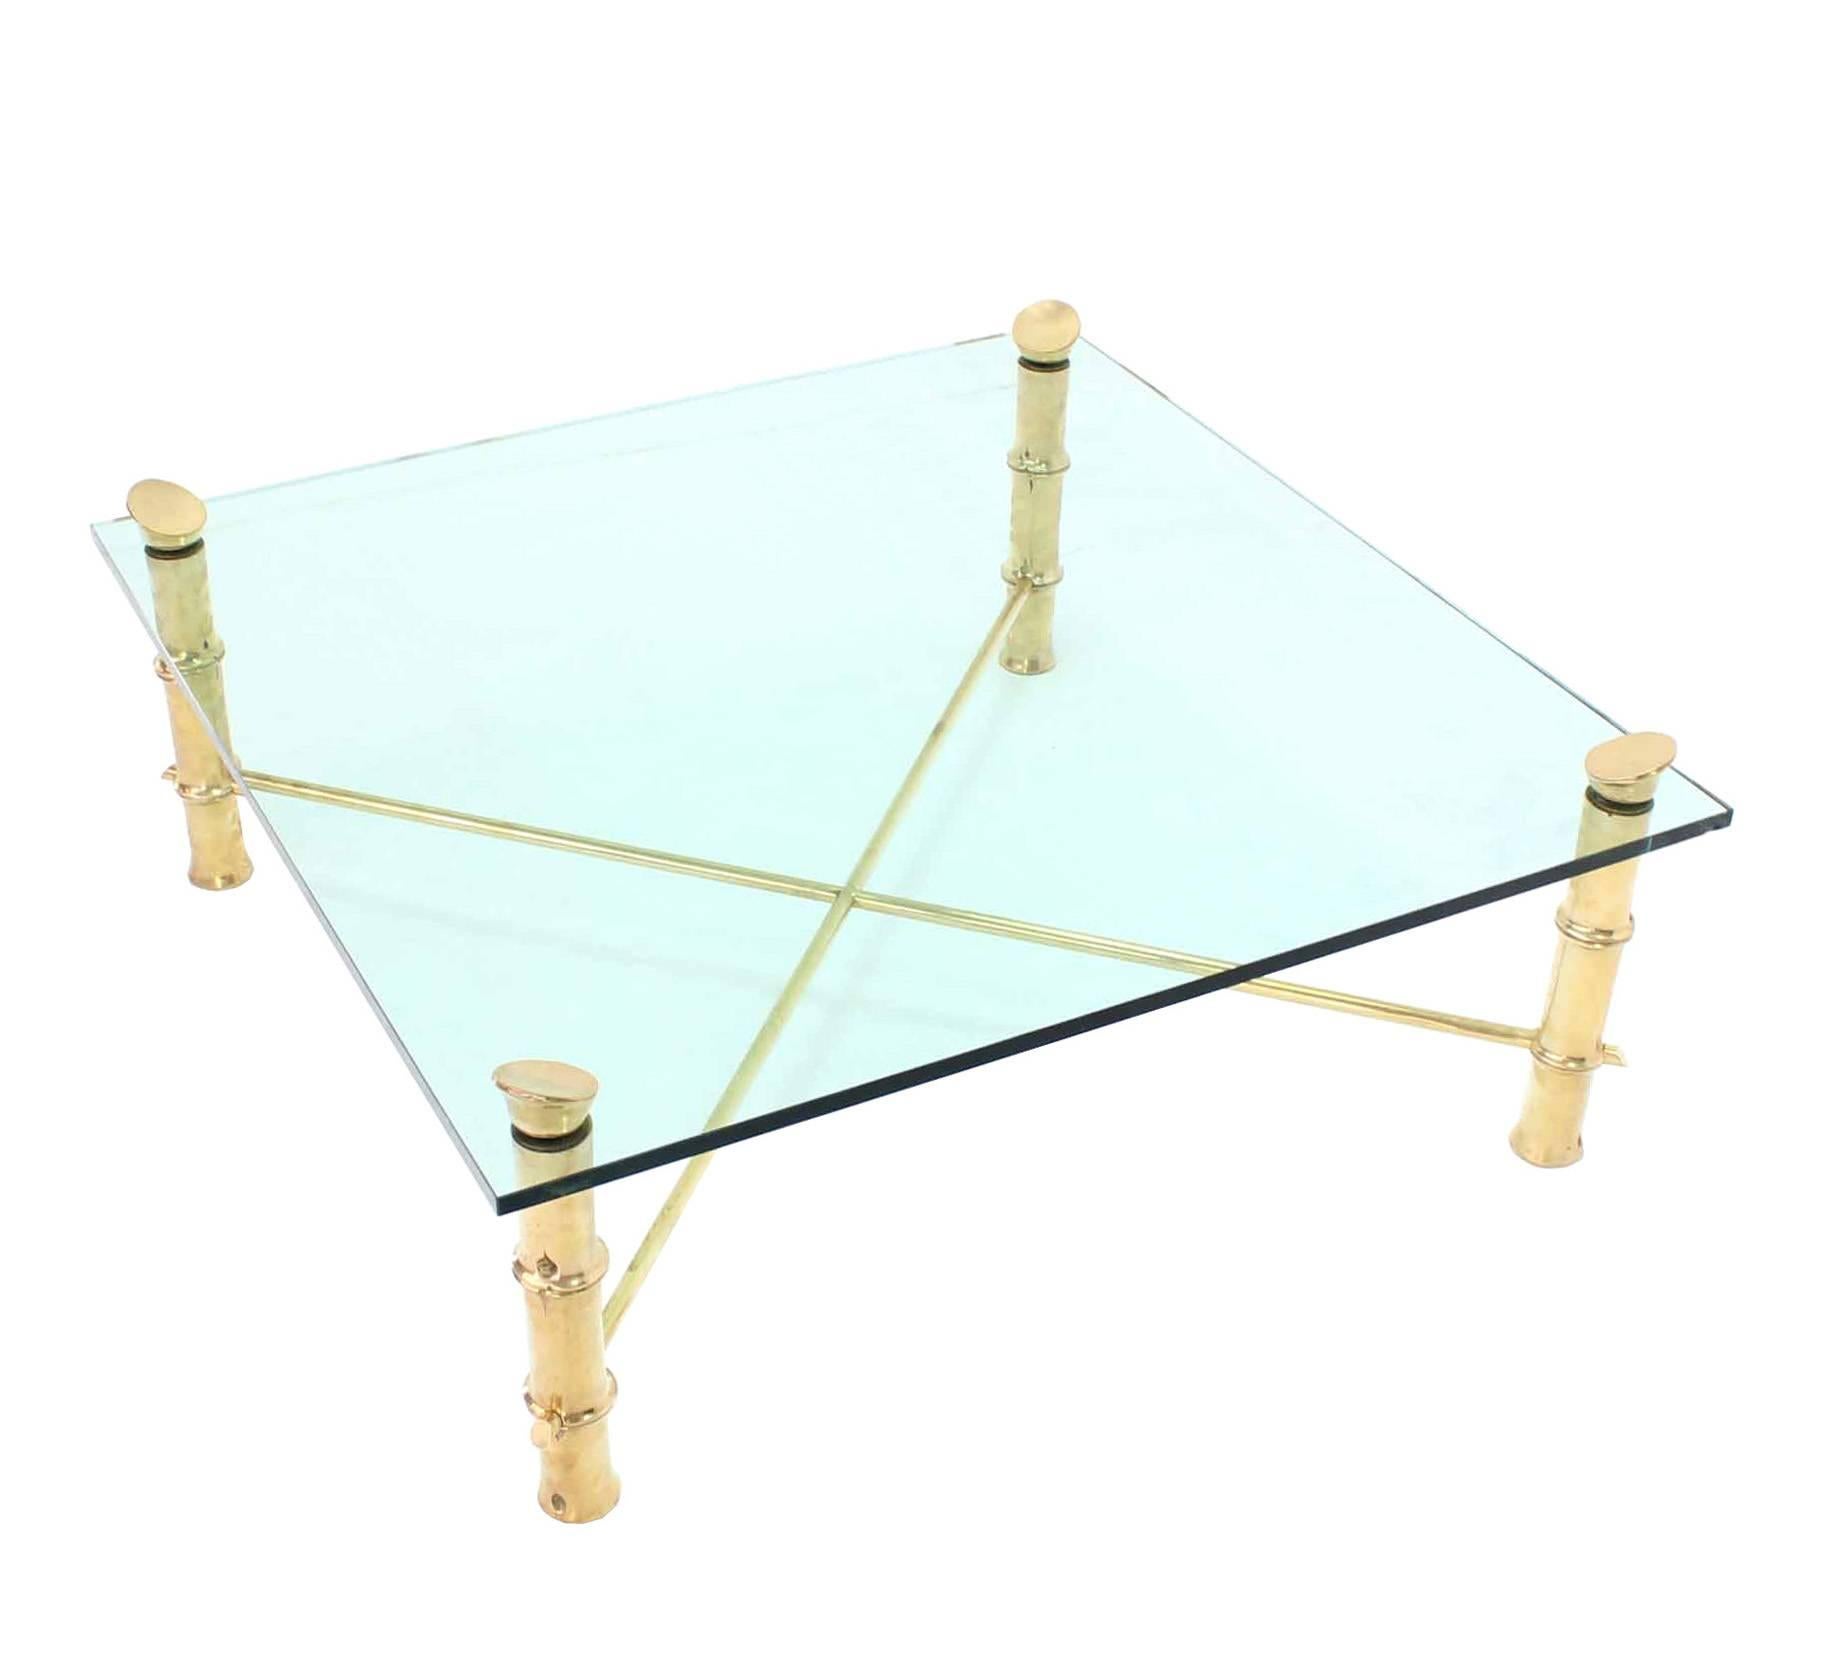 50x50 square coffee table